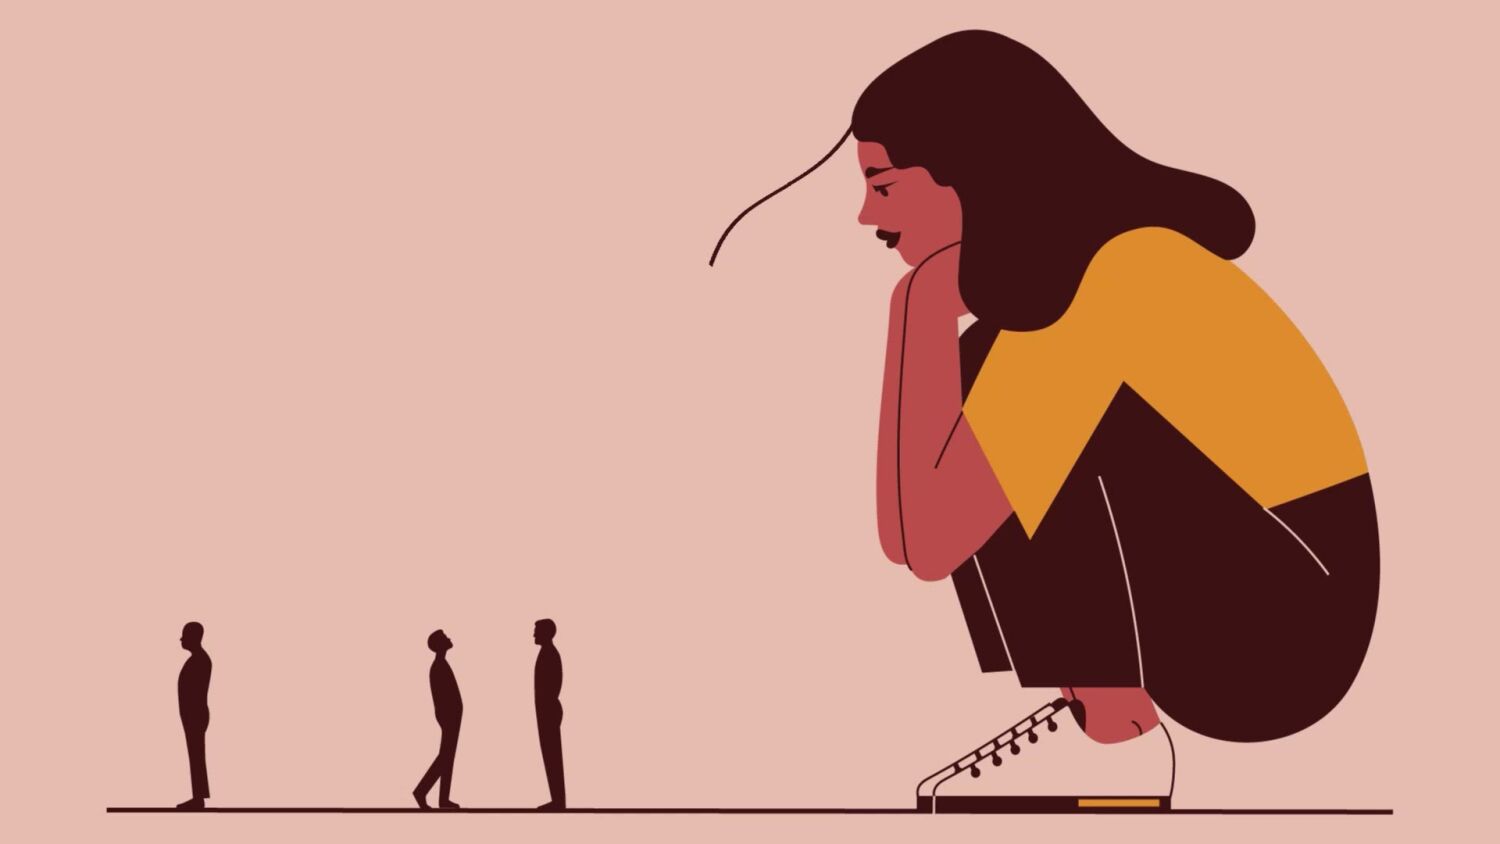 L.A. Affairs: My divorce isn't contagious. Why are people treating me this way?